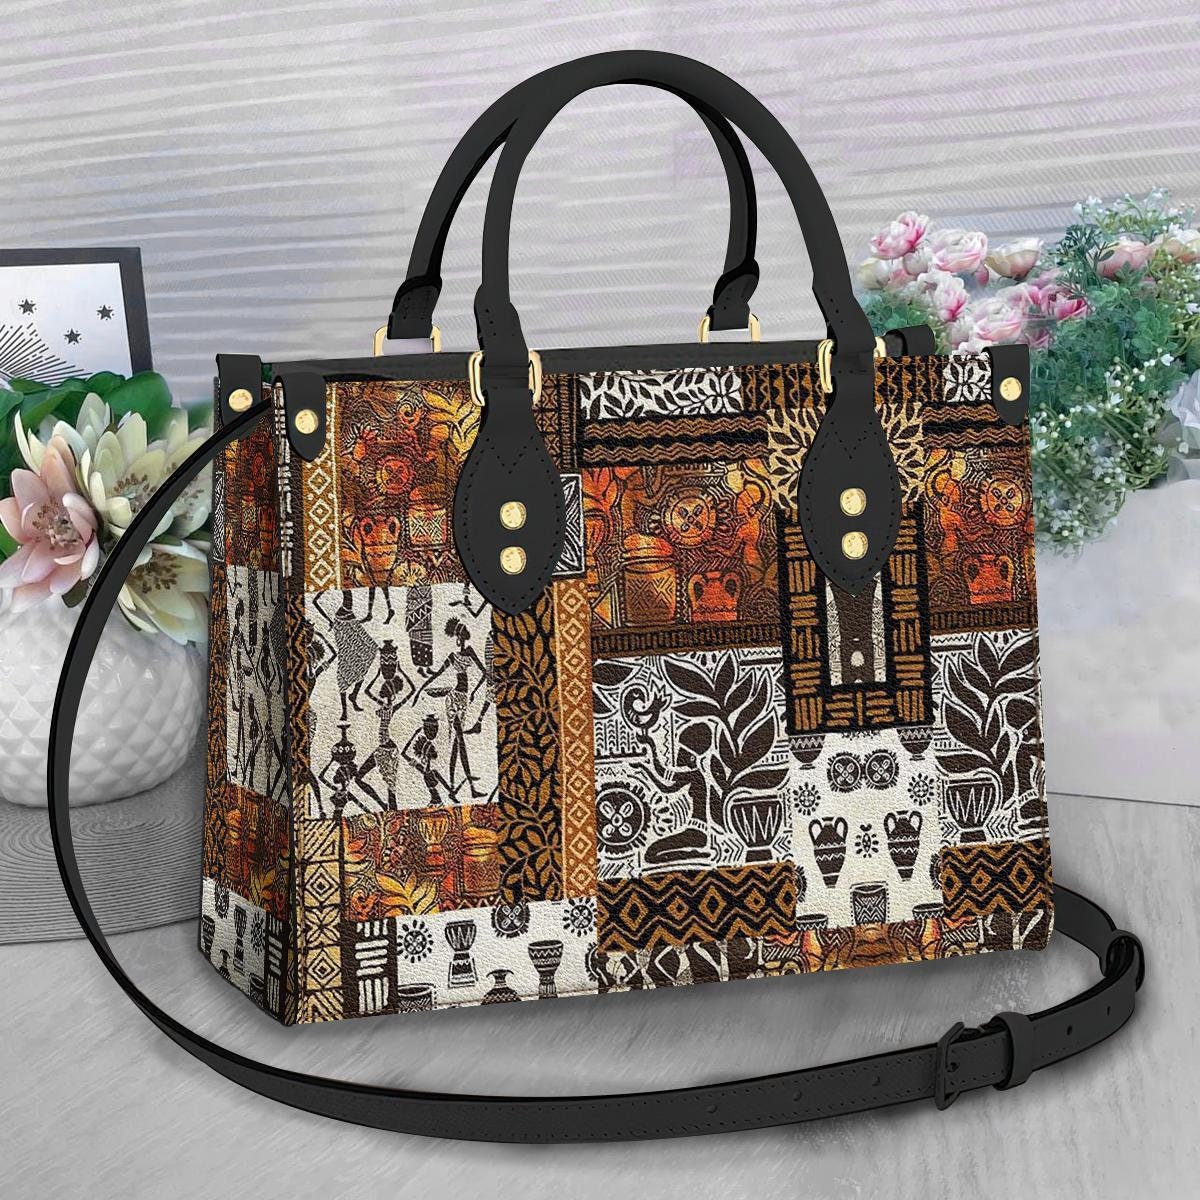 Africa Leather Bag